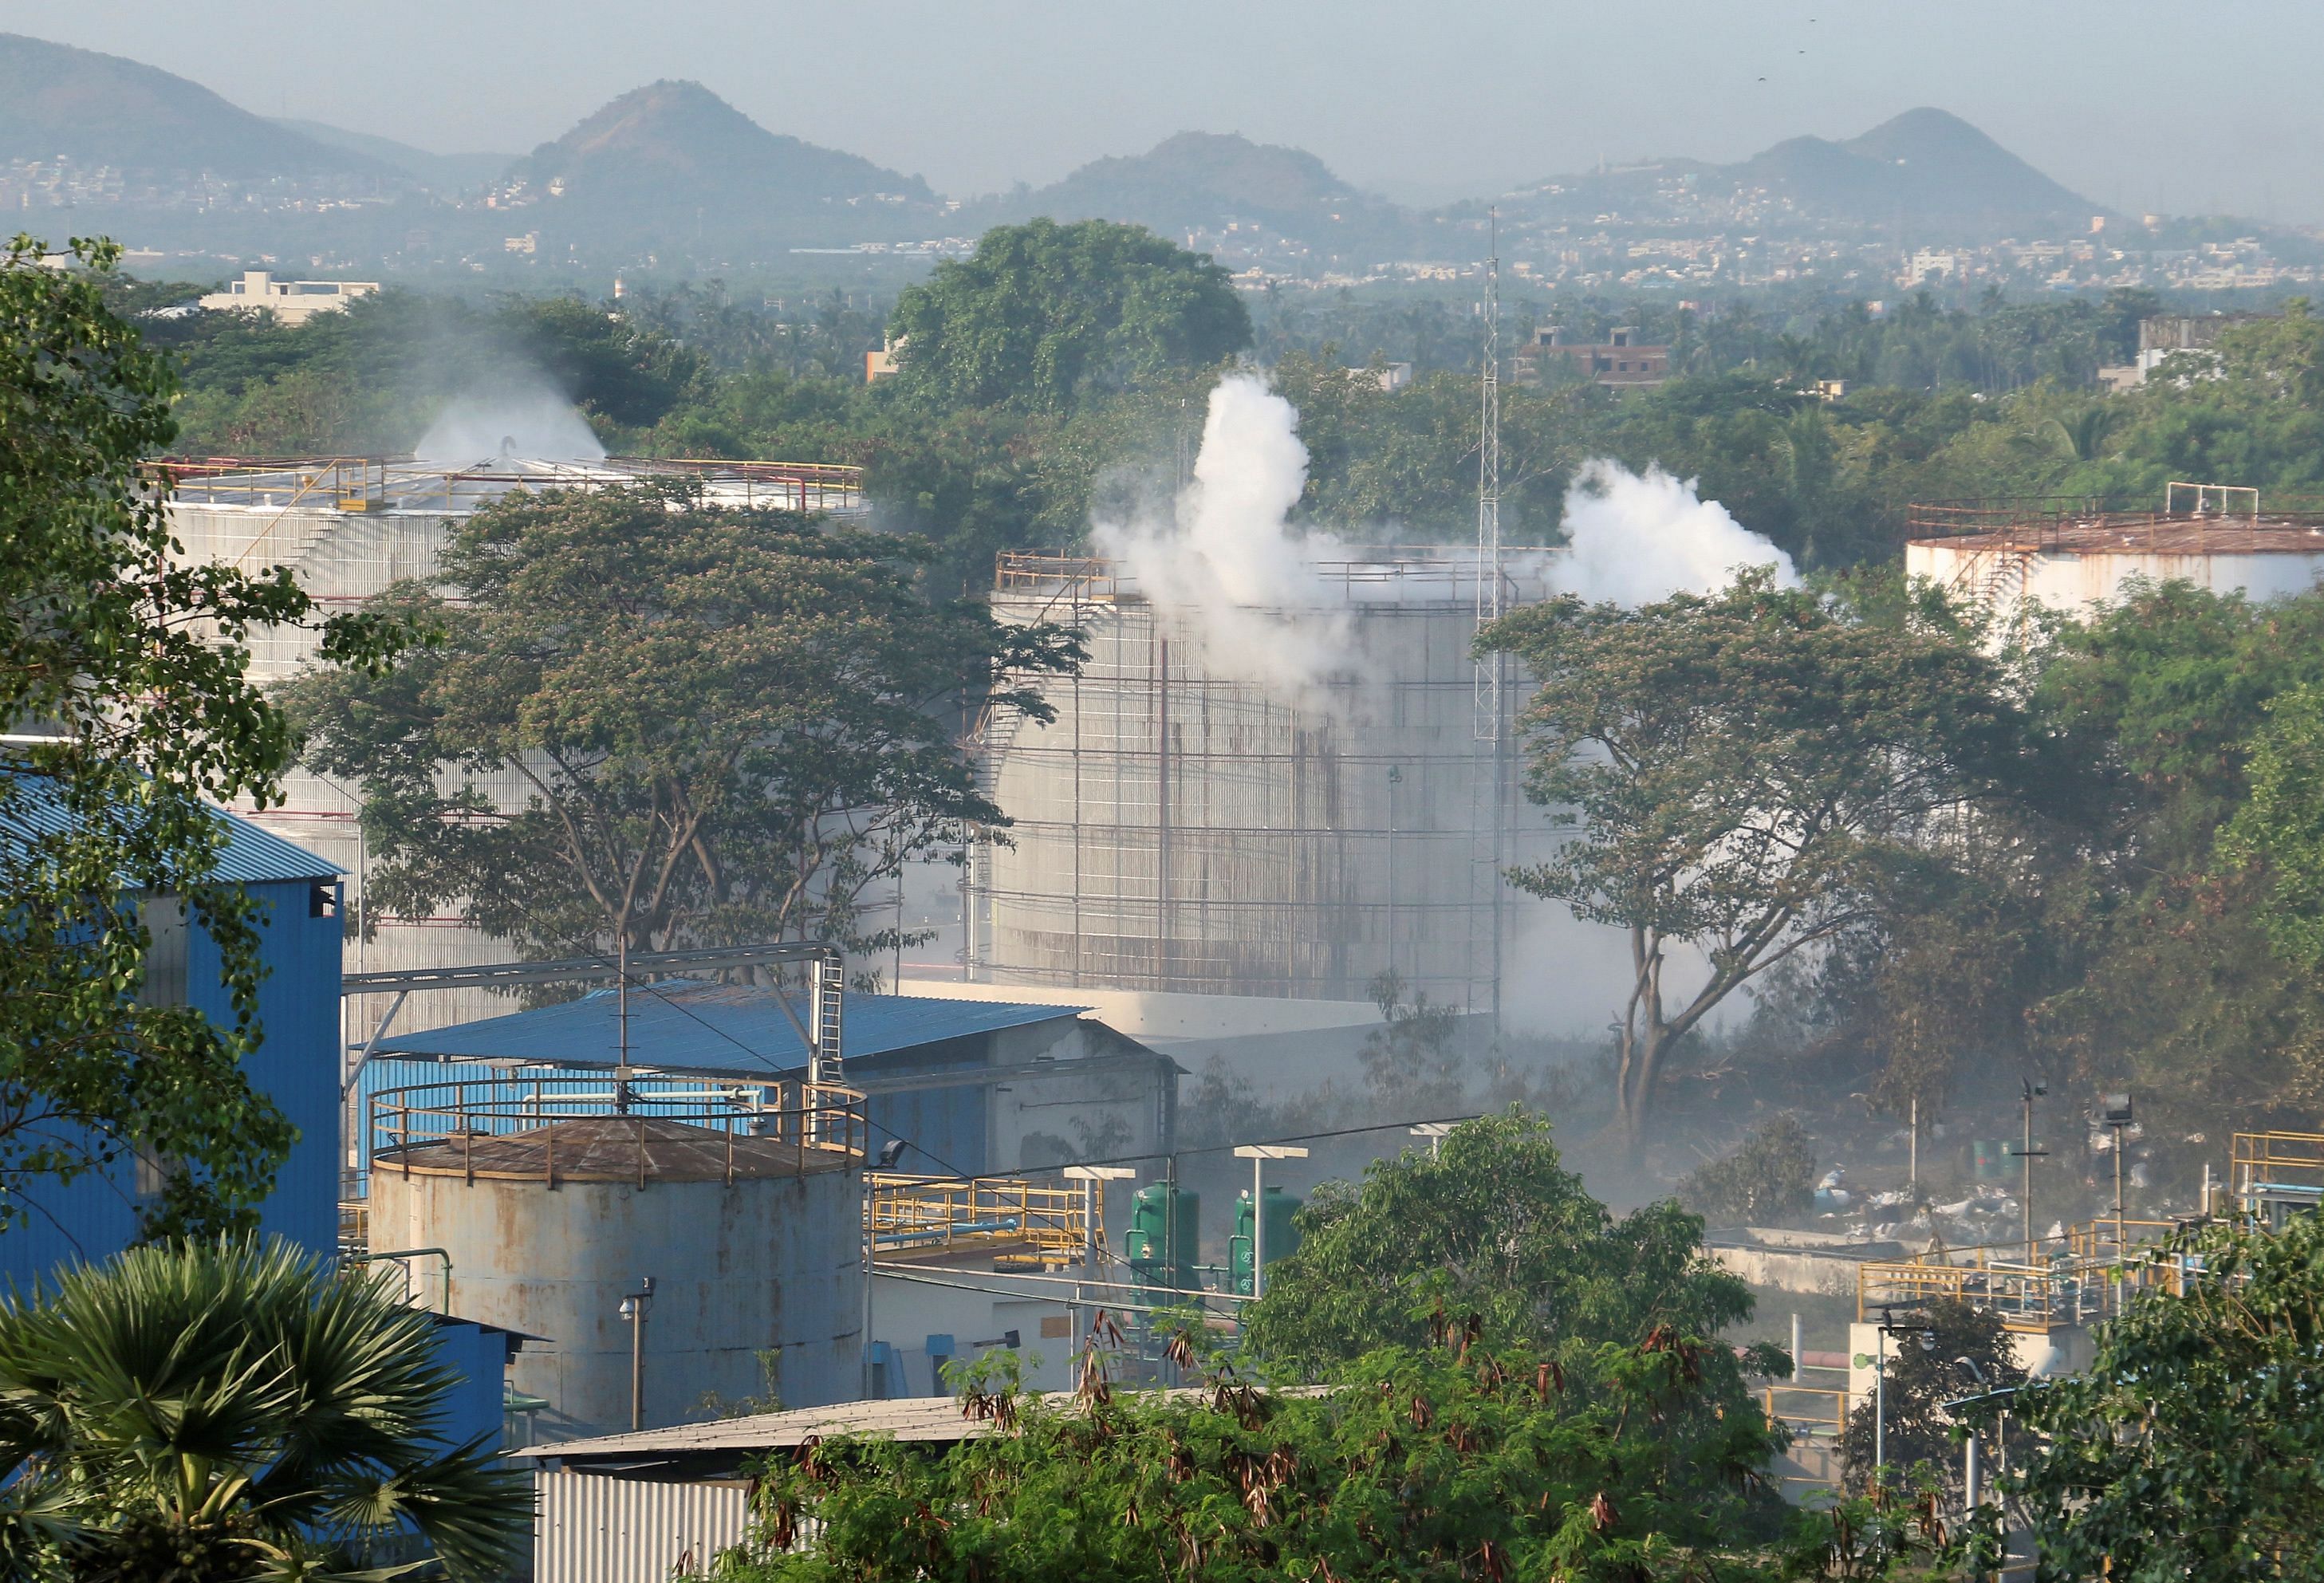 Smoke is seen at LG Polymers plant in Visakhapatnam, India. (Reuters Photo)